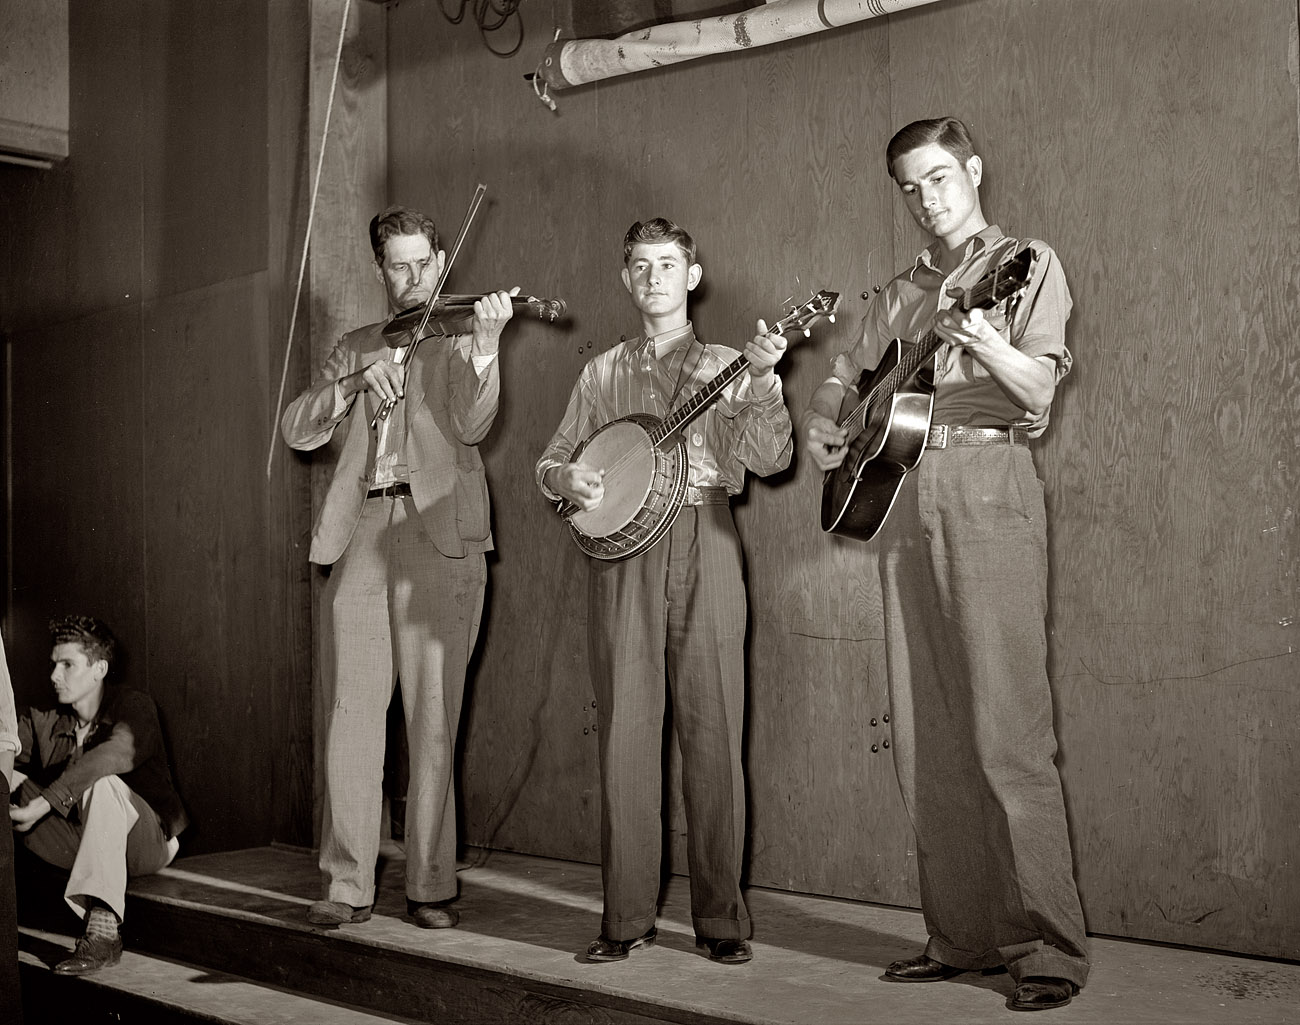 From February 1942, another of Arthur Rothstein's photos of the Drake family entertaining at a Saturday night dance for the Farm Security Administration's resettlement camp at Weslaco, Texas, home to many farm families displaced by the droughts and bankruptcies of the Dust Bowl years. The fiddle player is Nathan Drake; on banjo and guitar are his sons Jasper ("Sleepy") and Weldon. Thanks to Jasper's daughters Connie and Janette for providing the names. View full size. (I'm having a Shorpy family moment here, having heard from the photographer's daughter, Annie Rothstein-Segan, and now Jasper's daughters. Life is a circle.)